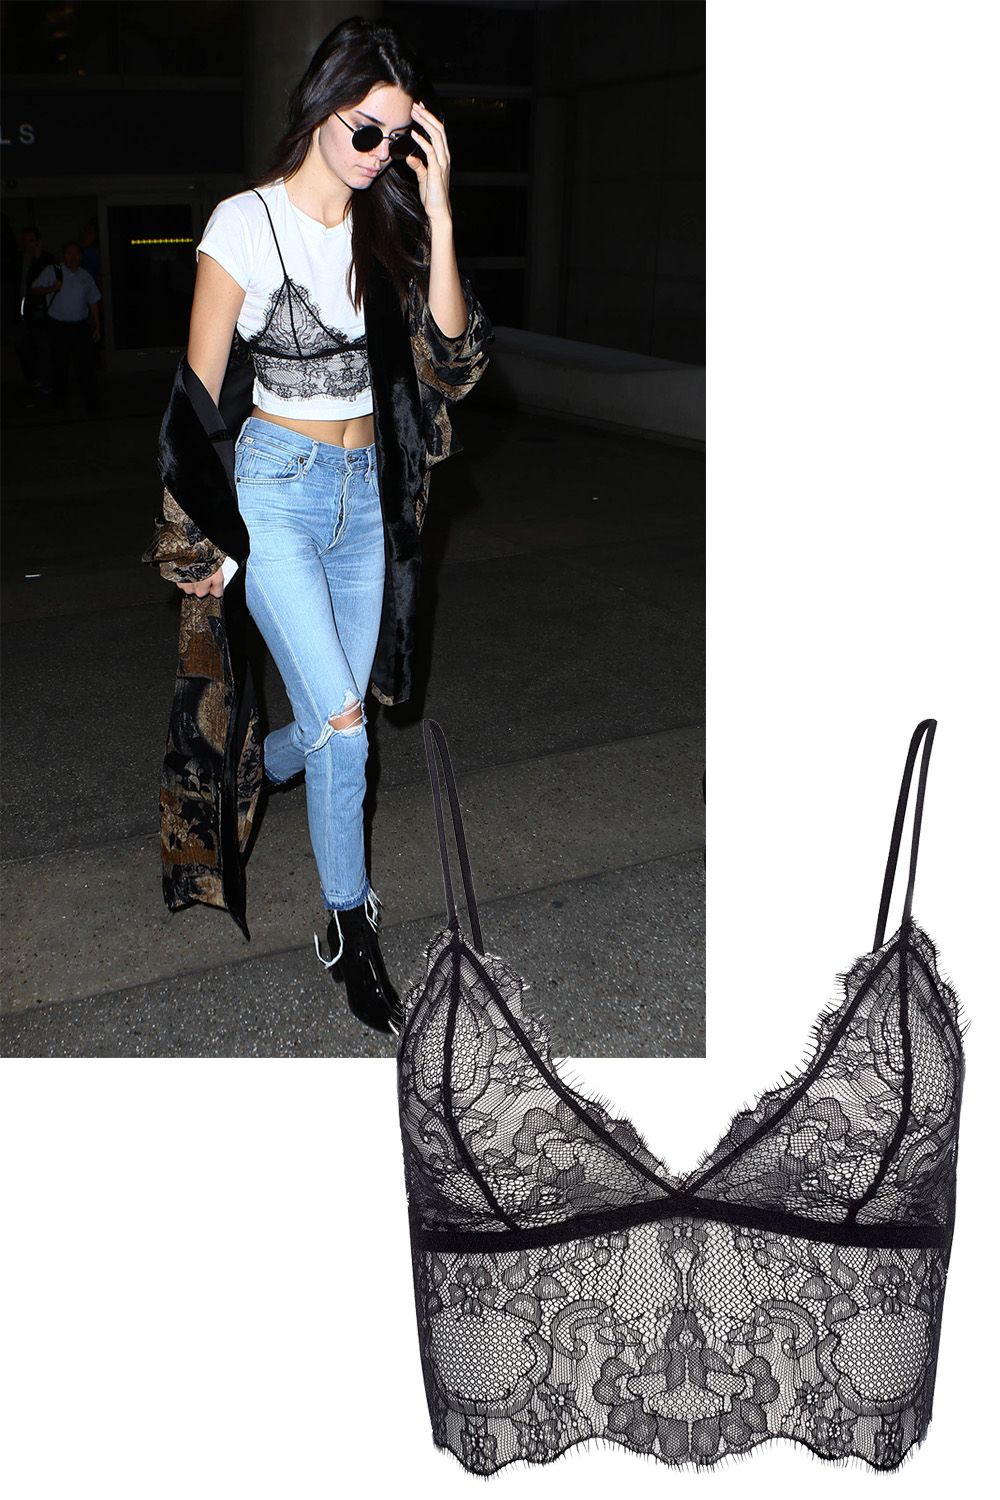 Lace Bralette Trend - How to Style Lace Bralettes